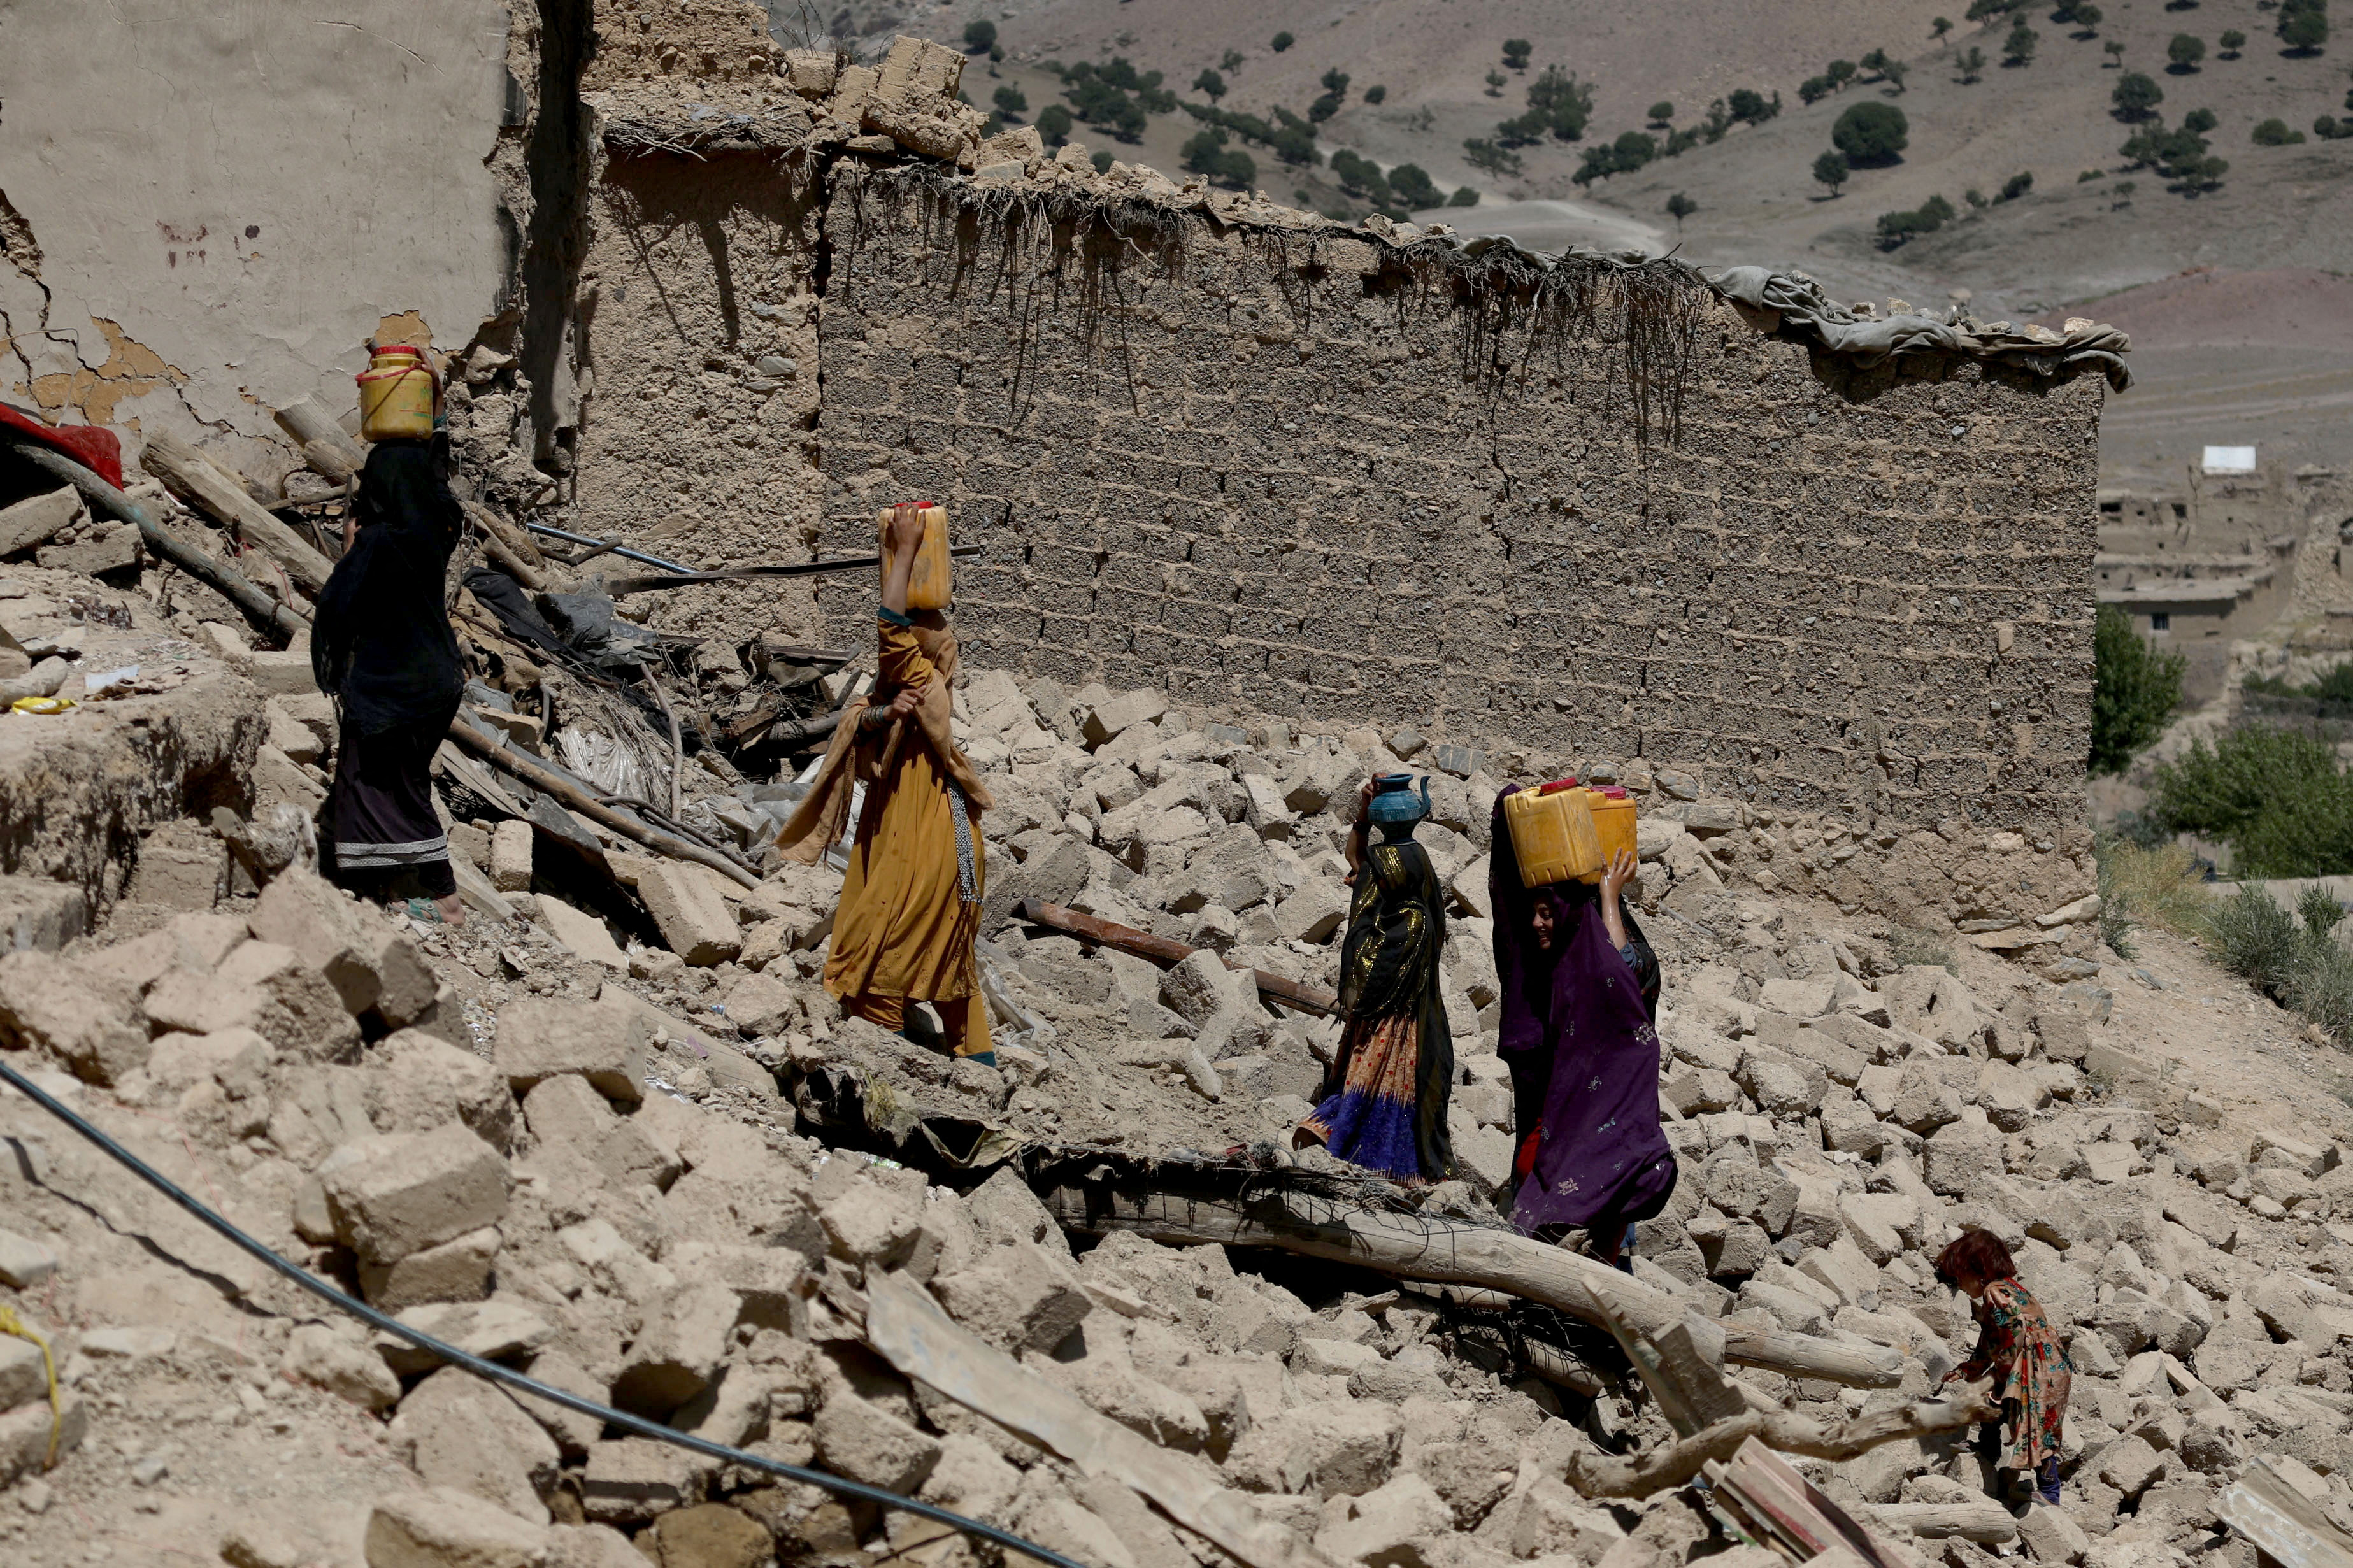 Afghan women carry water containers through the debris of damaged houses after the recent earthquake in Wor Kali village